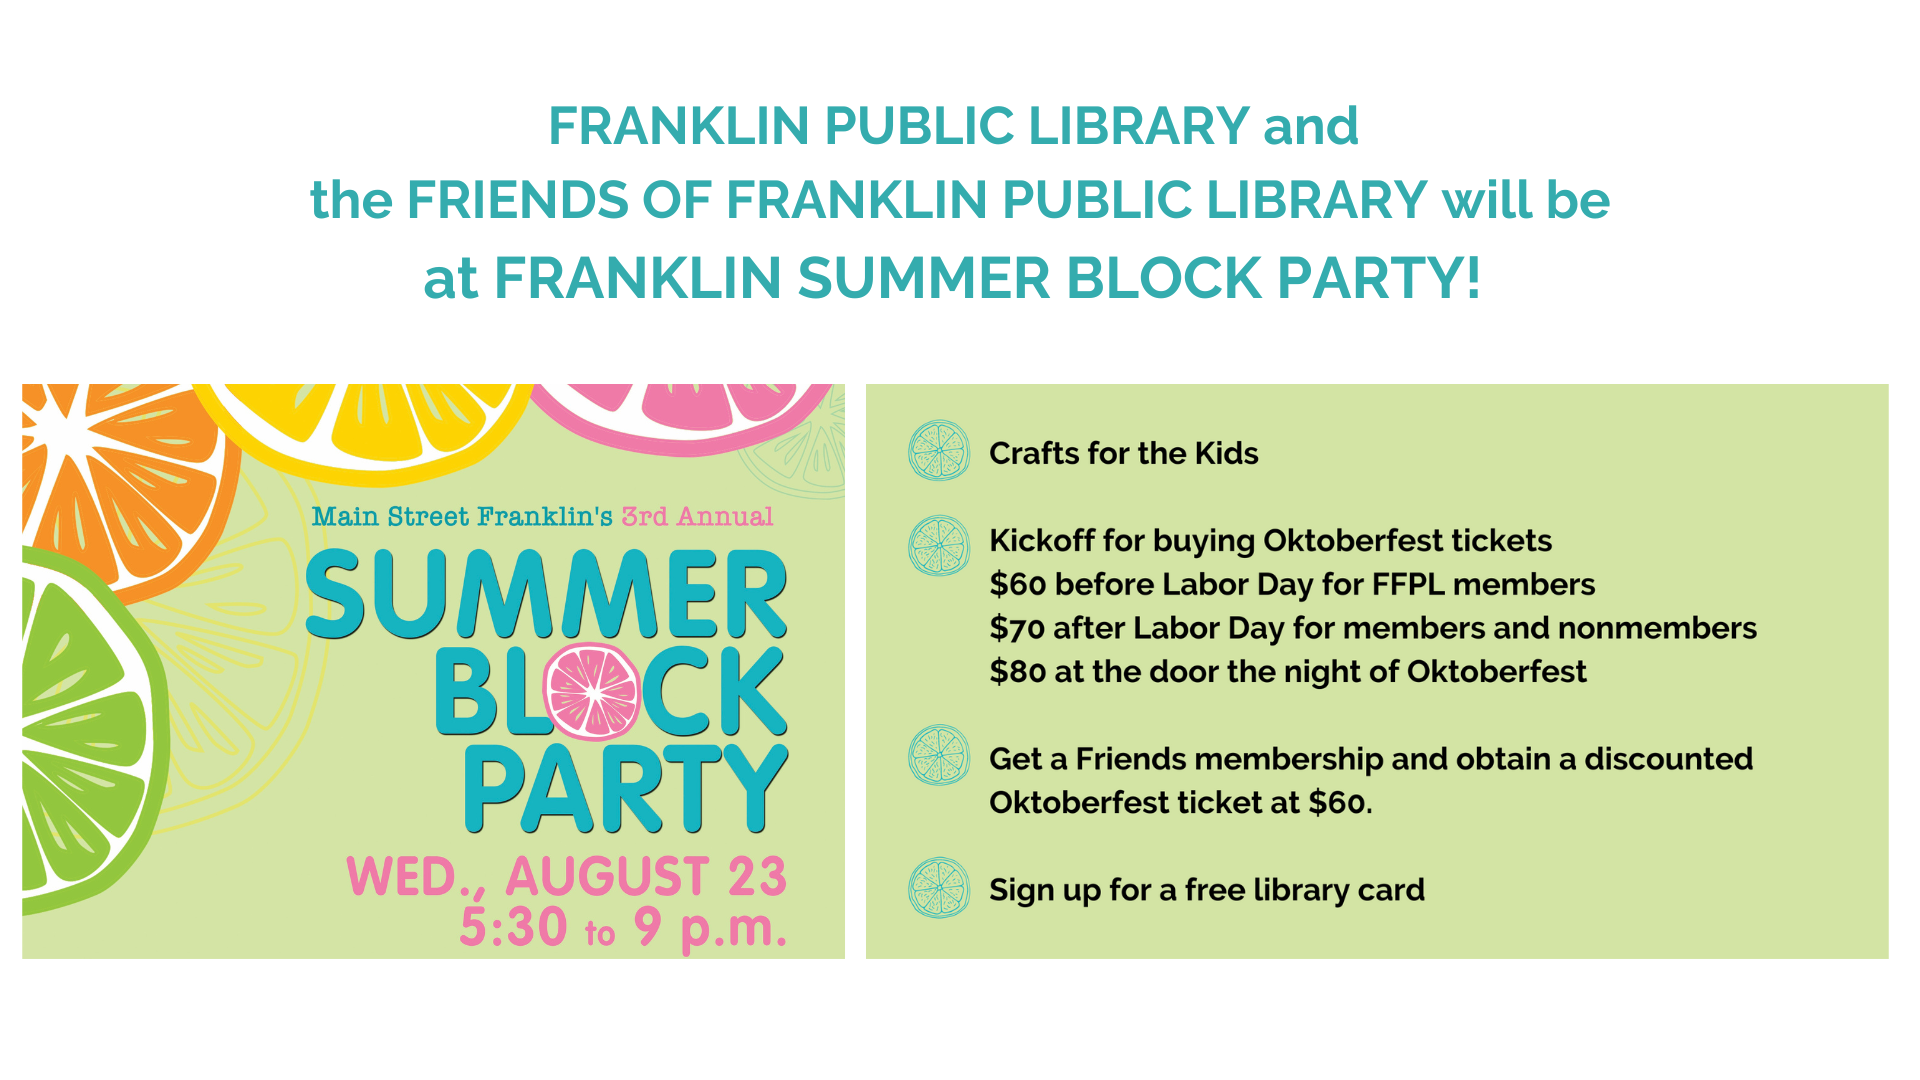 FB FRANKLIN PUBLIC LIBRARY and the FRIENDS OF FRANKLIN PUBLIC LIBRARY will be at SUMMER BLOCK PARTY! .png